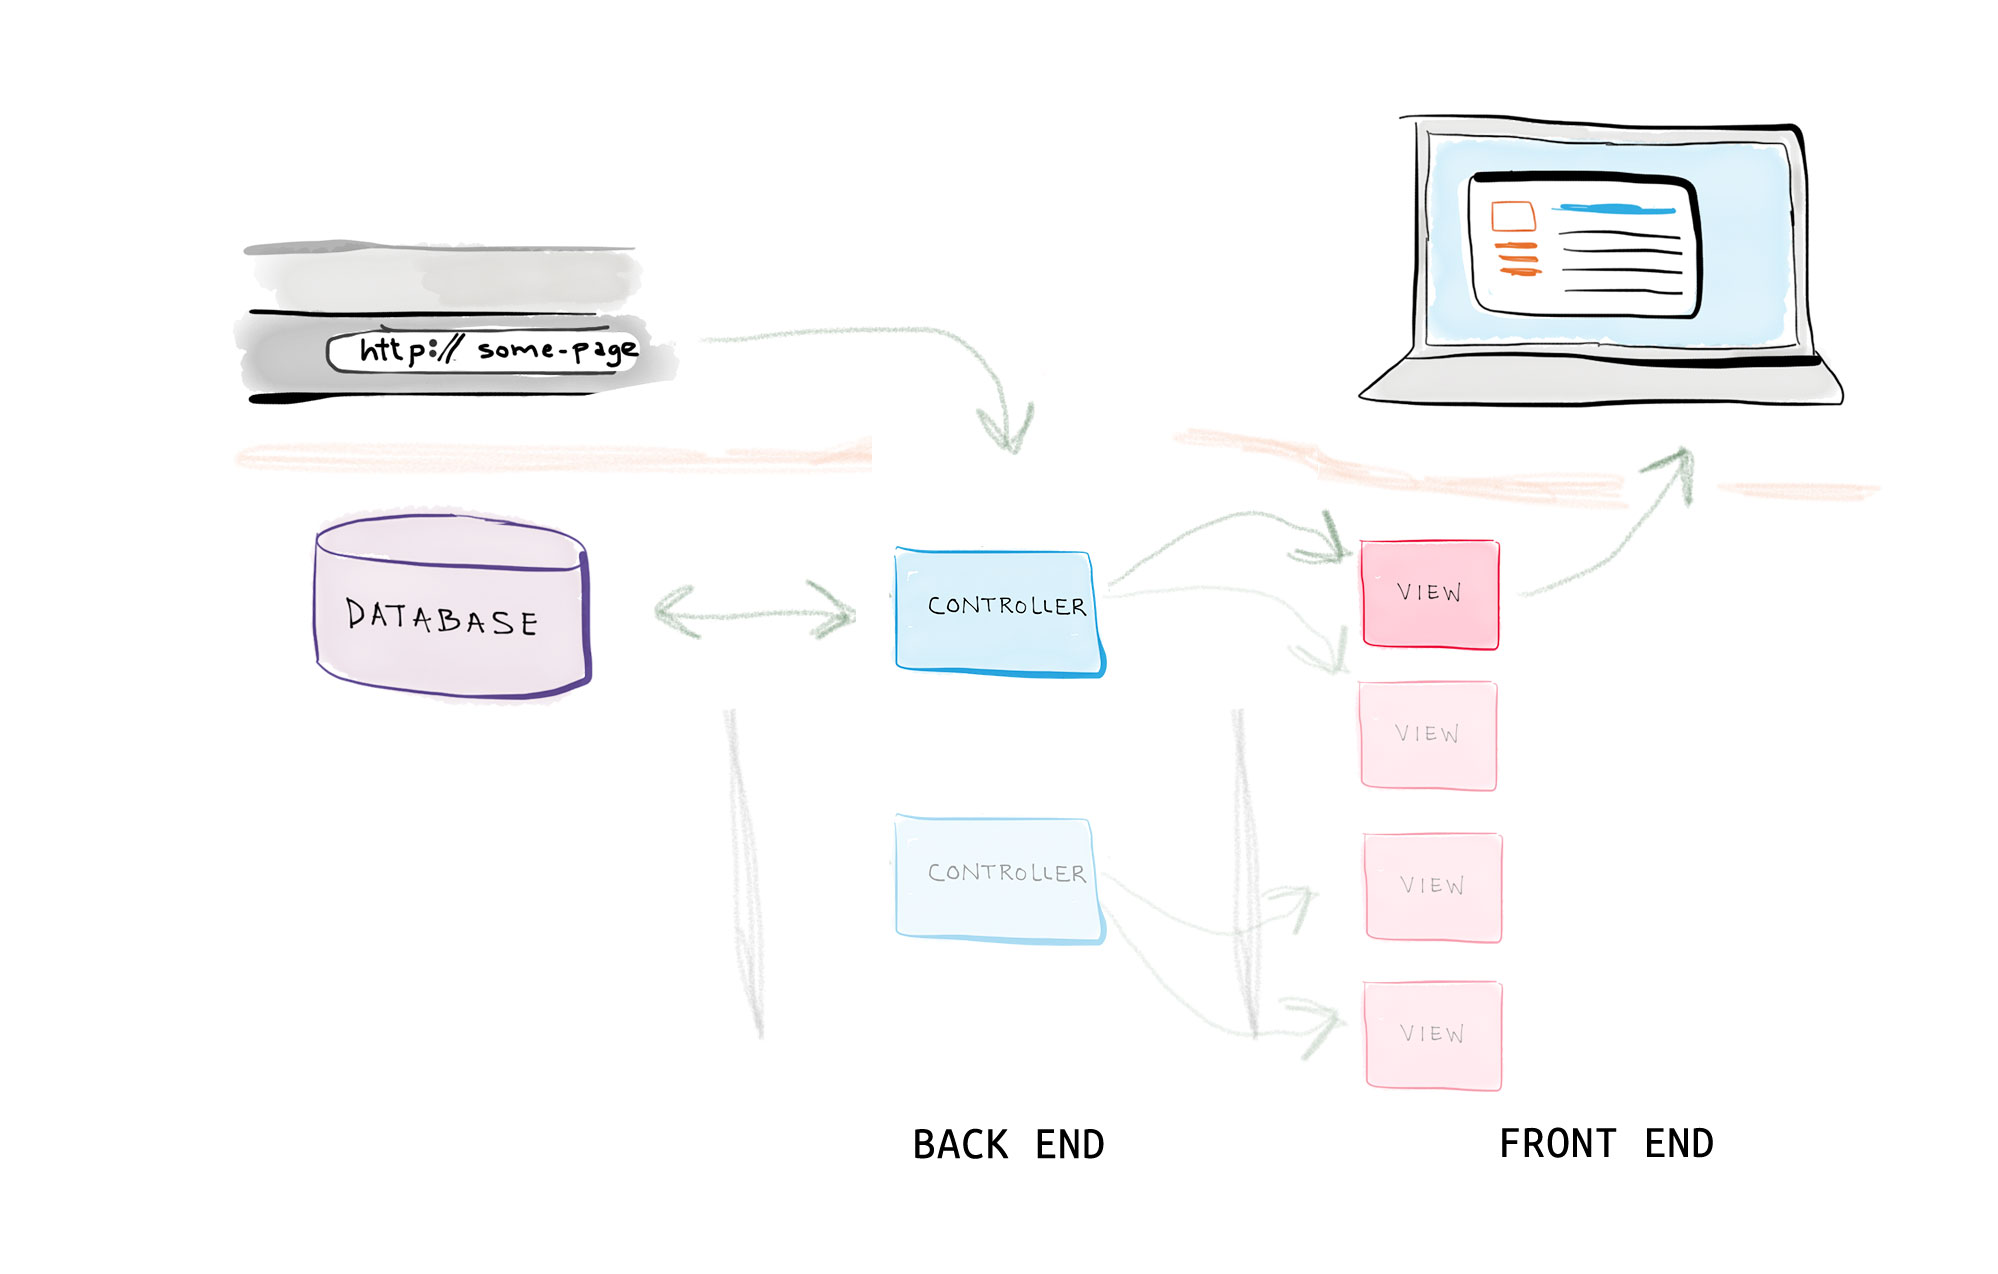 The flow of fulfilling a request made to a web application, with controllers & views